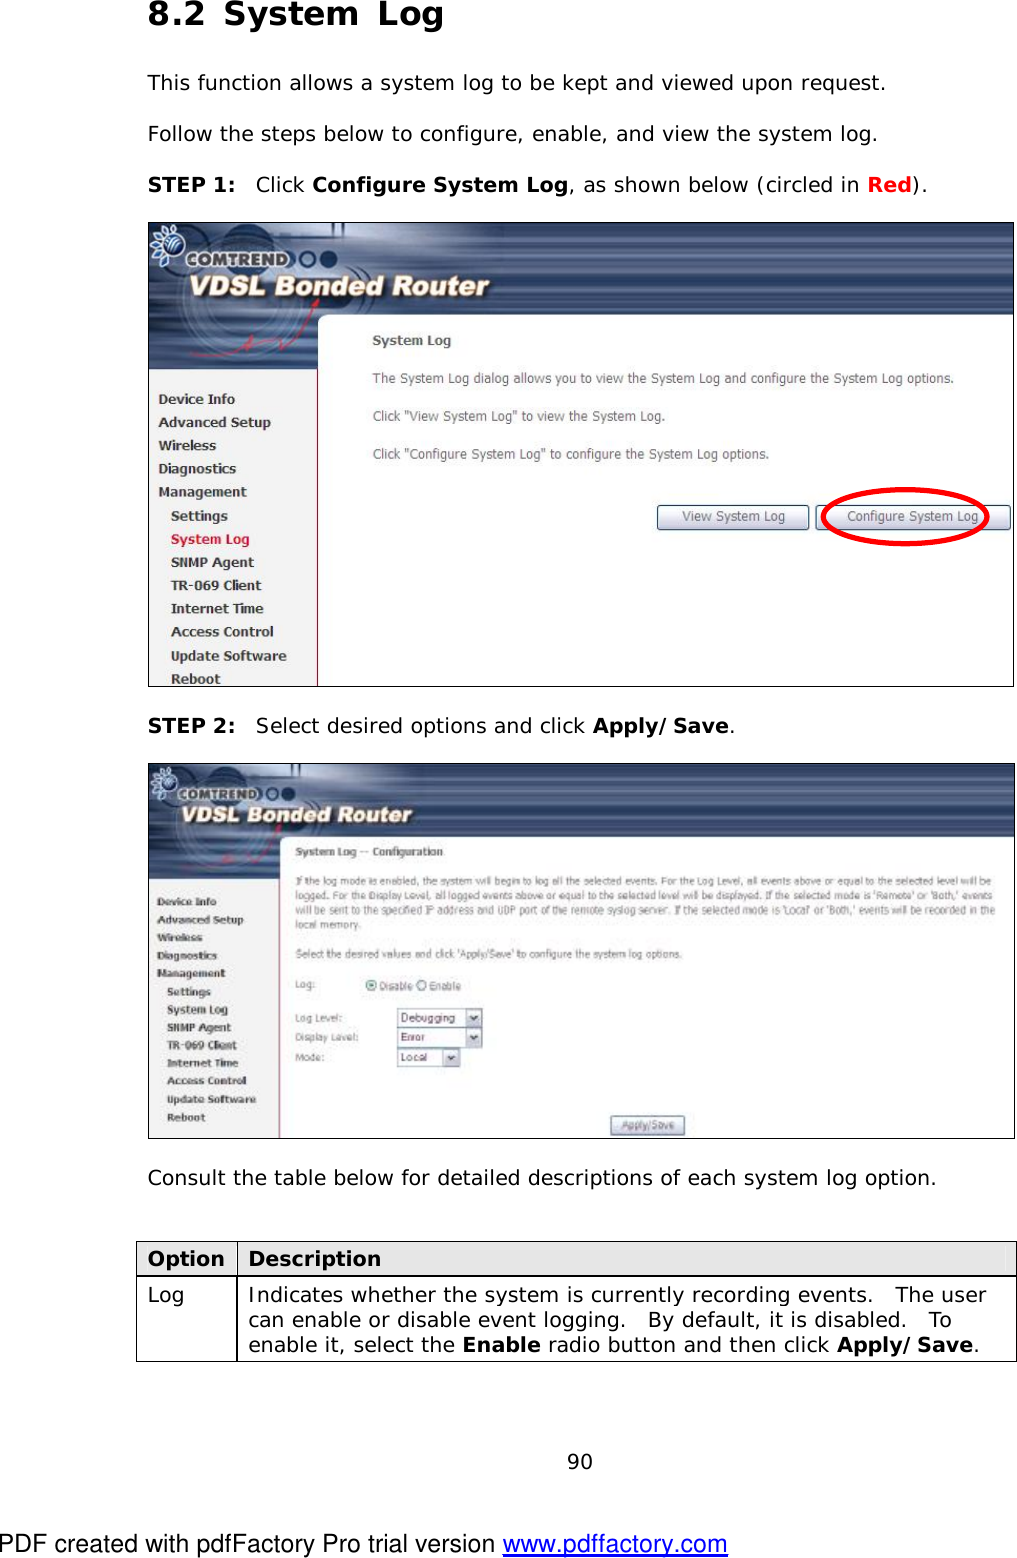  90 8.2 System Log This function allows a system log to be kept and viewed upon request.    Follow the steps below to configure, enable, and view the system log.  STEP 1:  Click Configure System Log, as shown below (circled in Red).    STEP 2:  Select desired options and click Apply/Save.    Consult the table below for detailed descriptions of each system log option.   Option Description Log   Indicates whether the system is currently recording events.  The user can enable or disable event logging.  By default, it is disabled.  To enable it, select the Enable radio button and then click Apply/Save.   PDF created with pdfFactory Pro trial version www.pdffactory.com